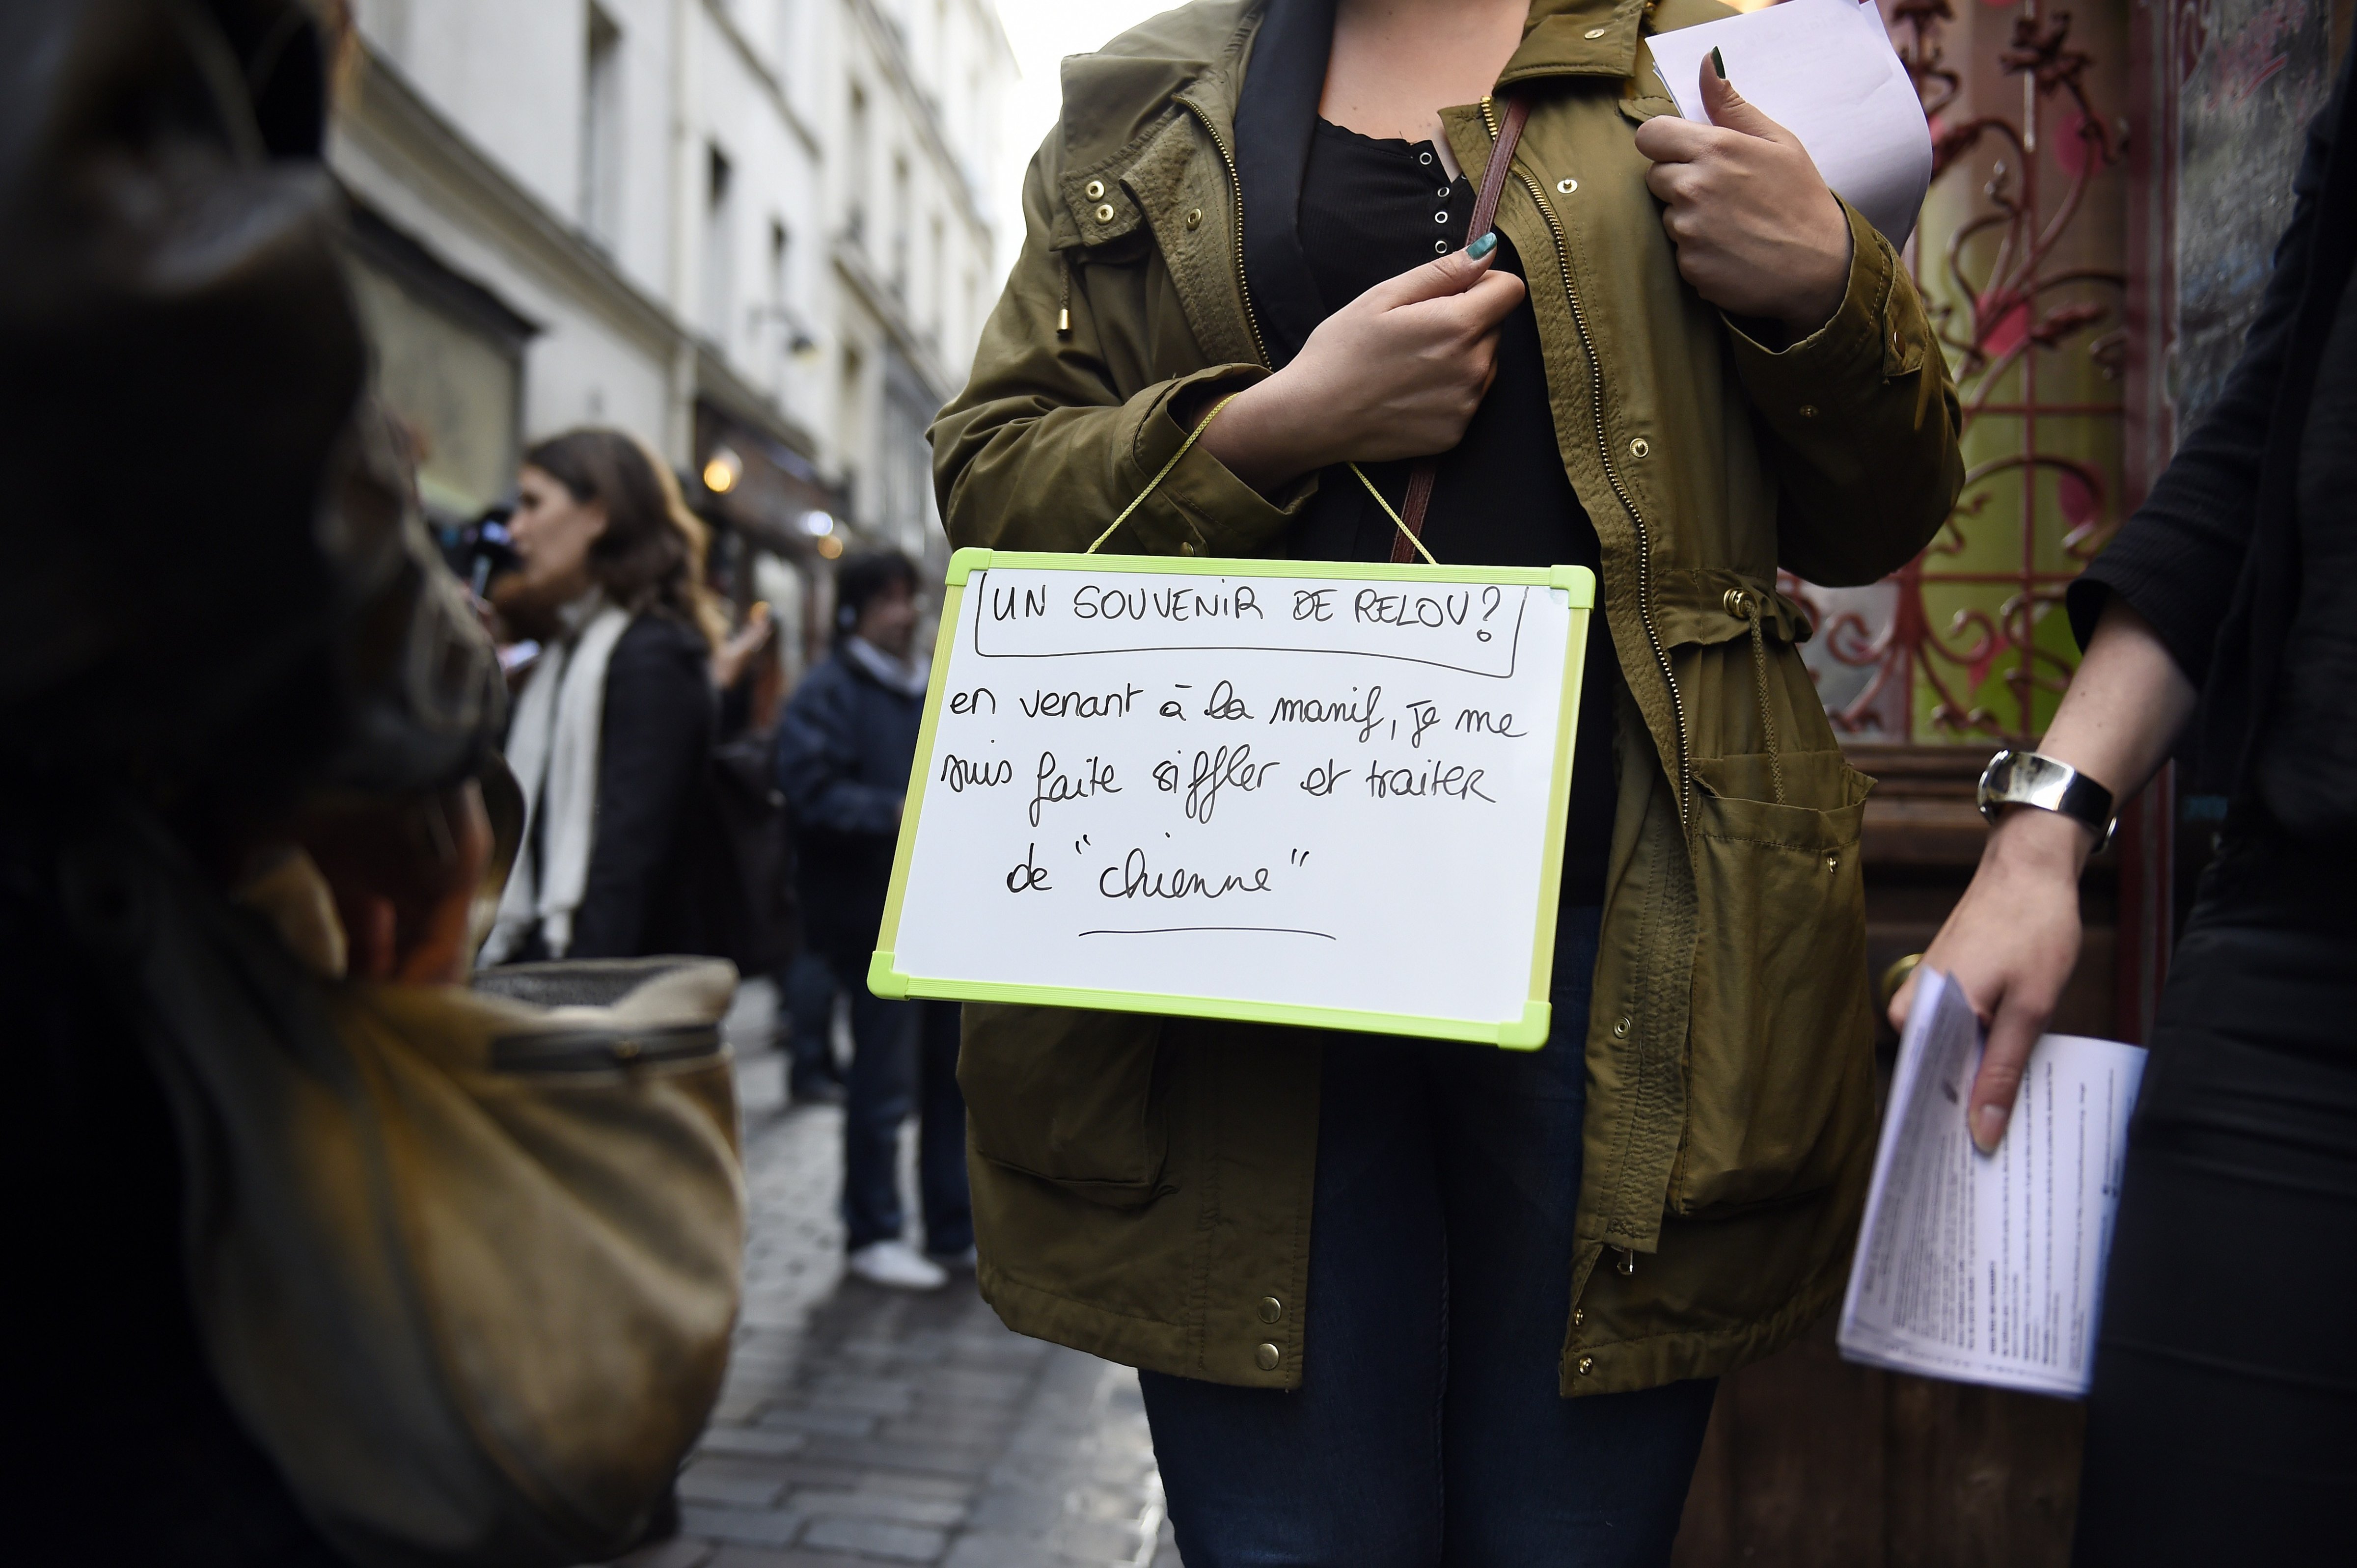 In this file photo, a woman poses with a sign reading "A unhappy memory - as I came to this protest, several people whistled at me and called me a'dog' " as she takes part in a protest against sexual and verbal harassment, on April 25, 2014, in Paris. (Franck Fife—AFP/Getty Images)